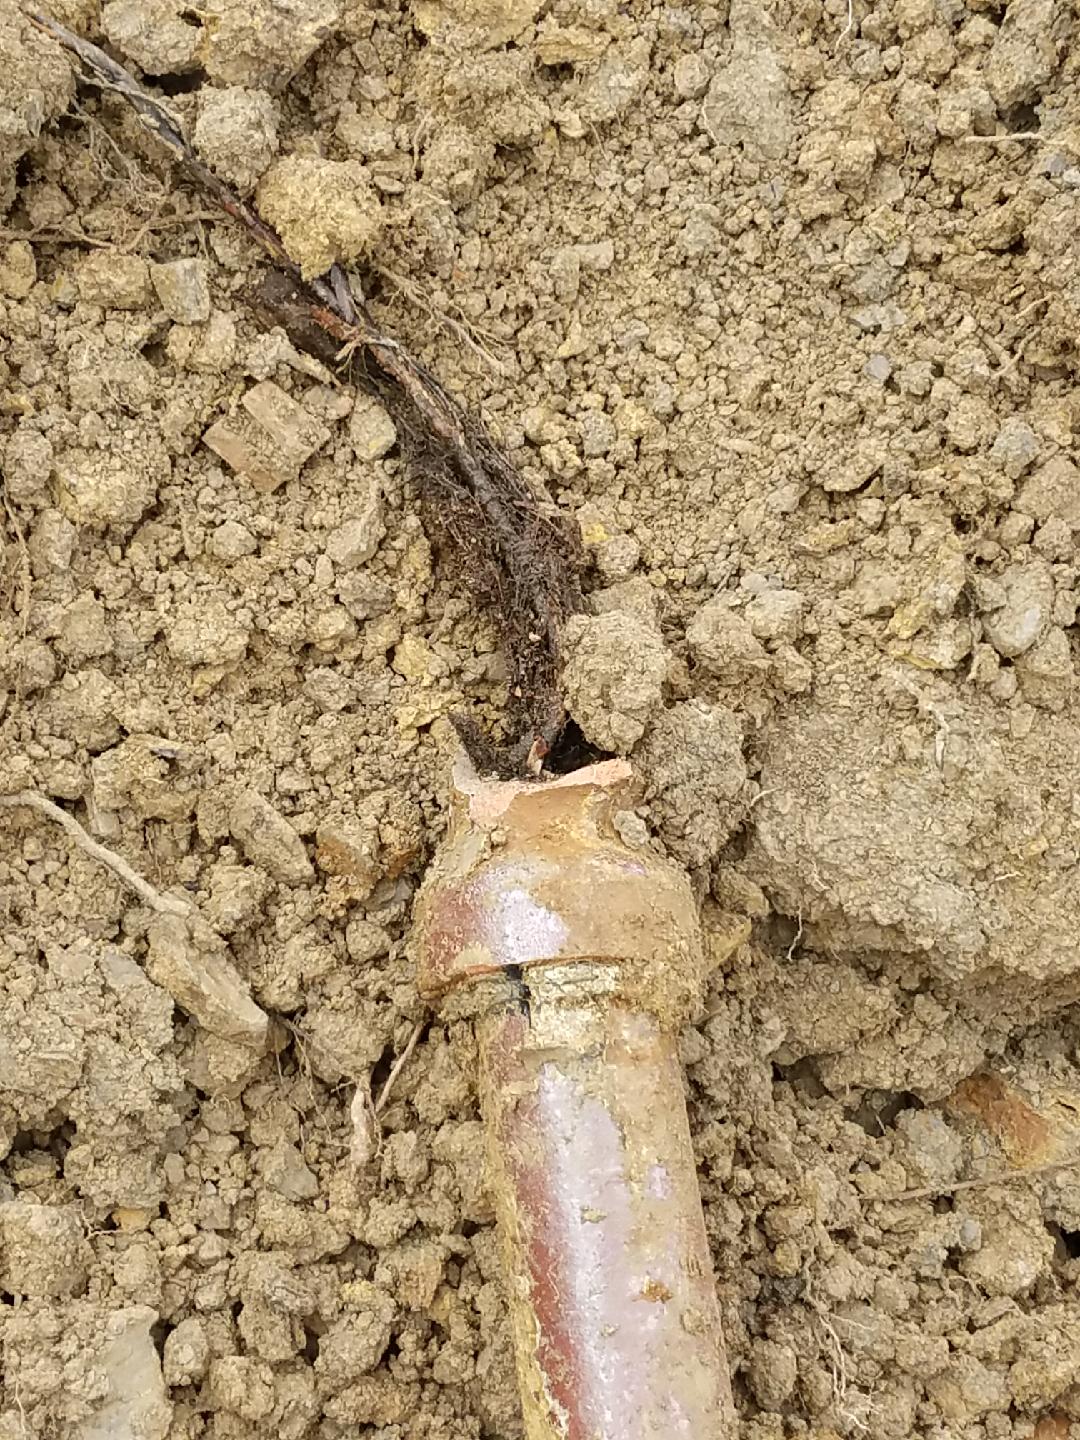 Lateral sewer line blocked with tree roots growing through sewer pipes